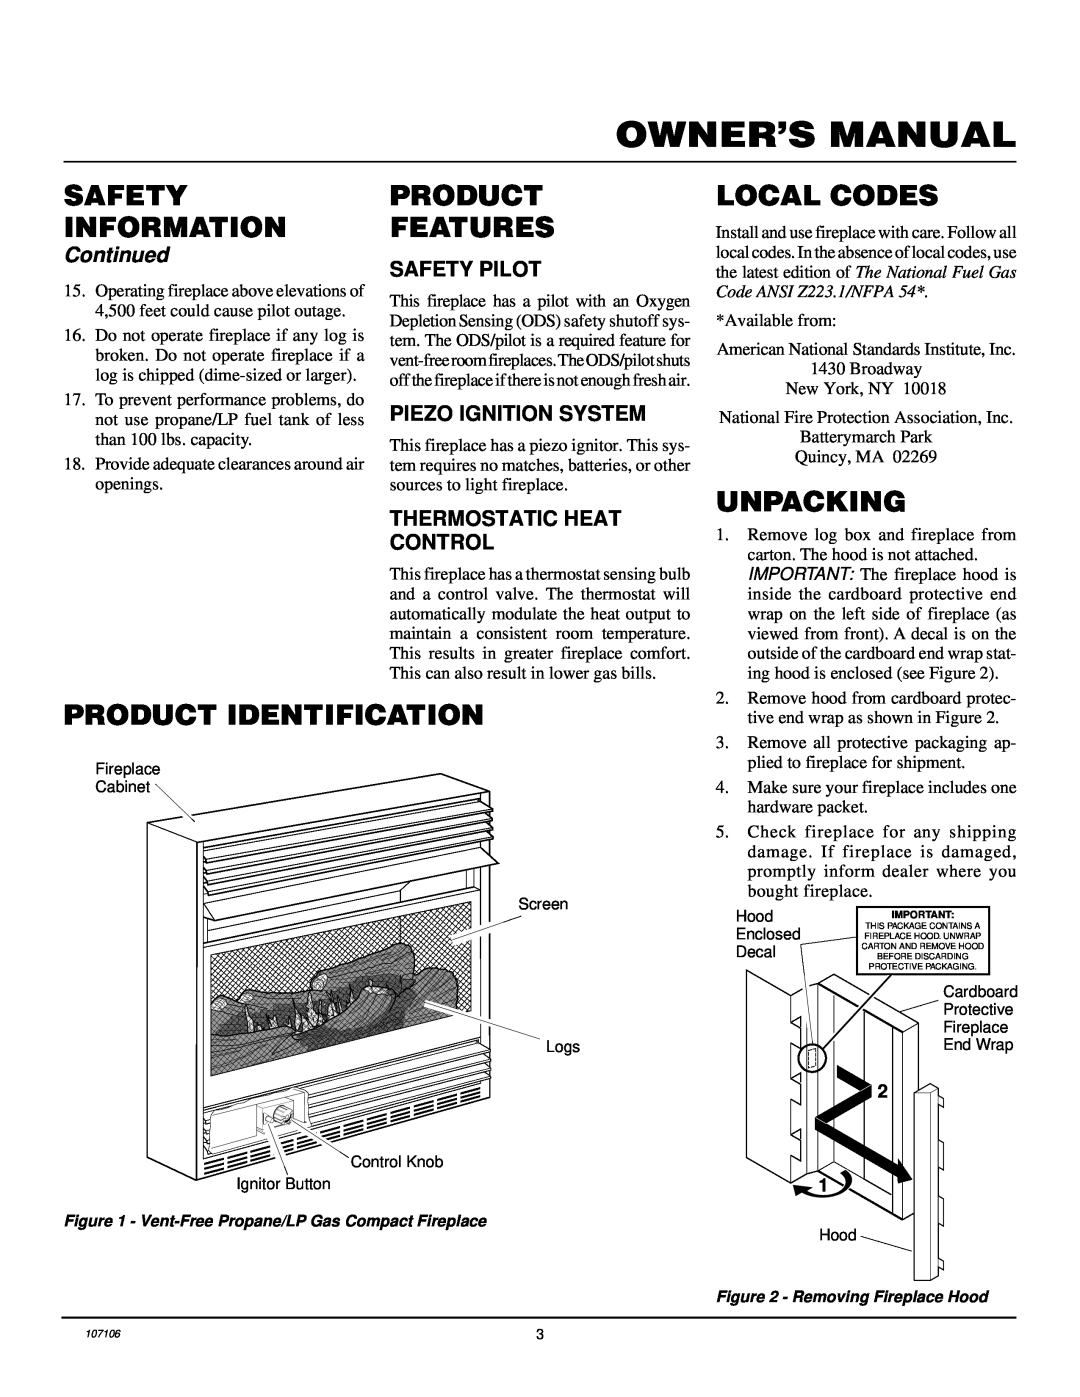 FMI FMH26TP Product Features, Local Codes, Product Identification, Unpacking, Continued, Safety Pilot, Safety Information 